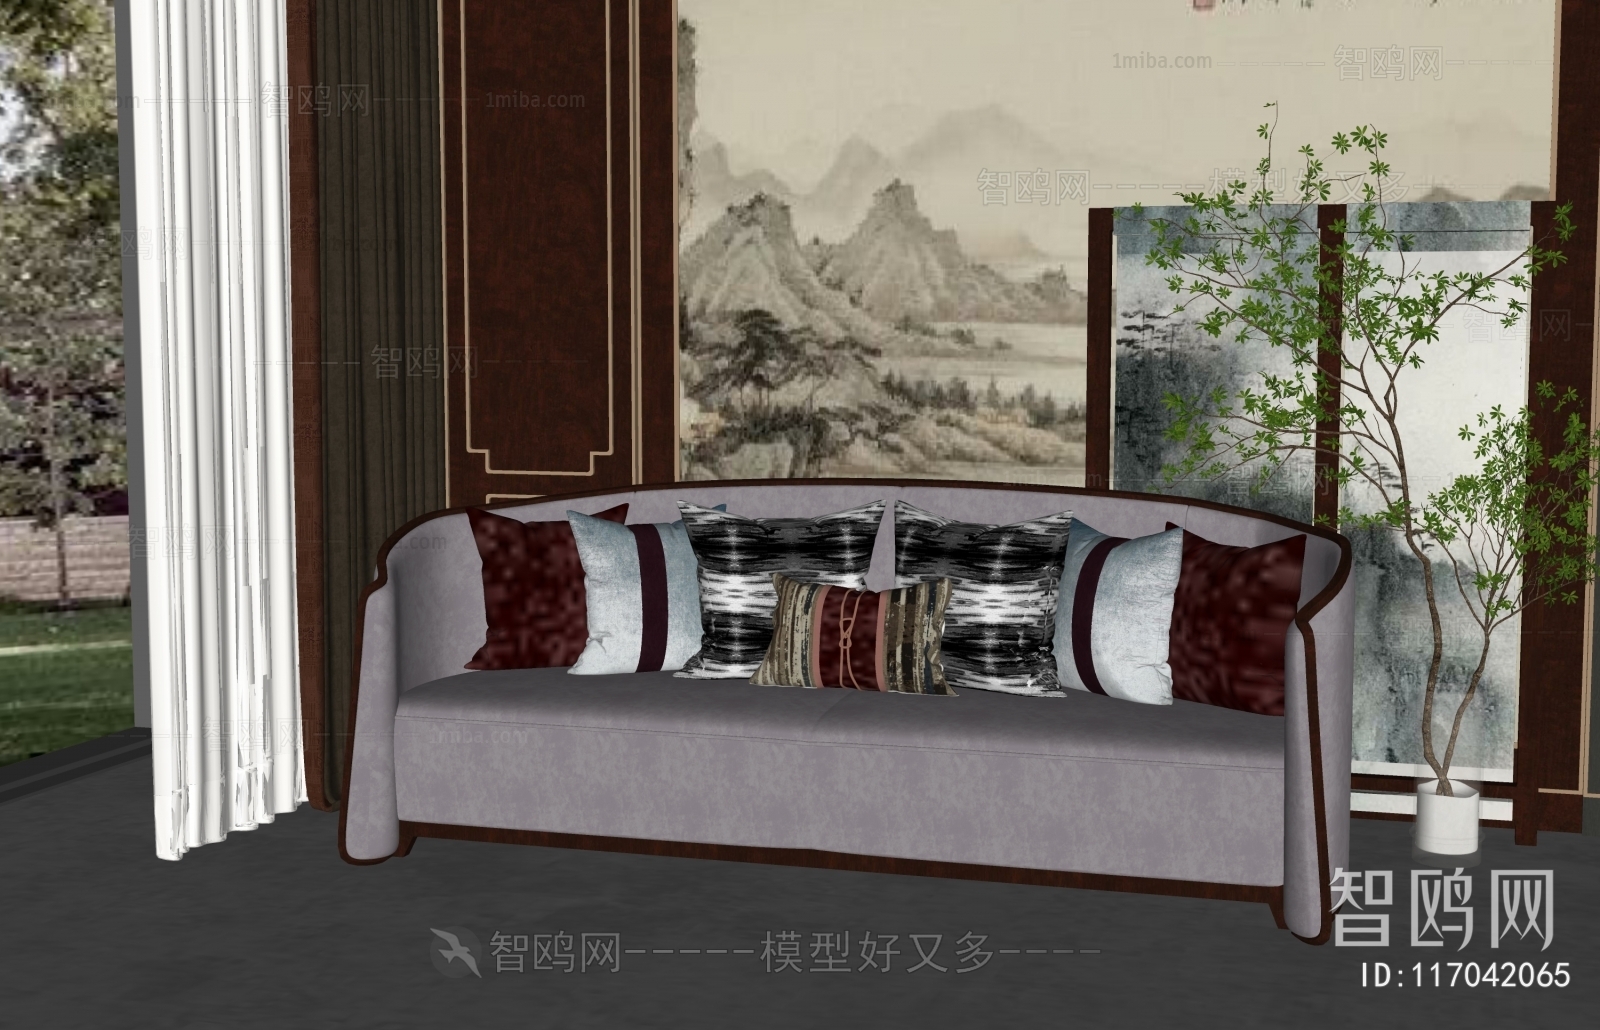 New Chinese Style A Sofa For Two